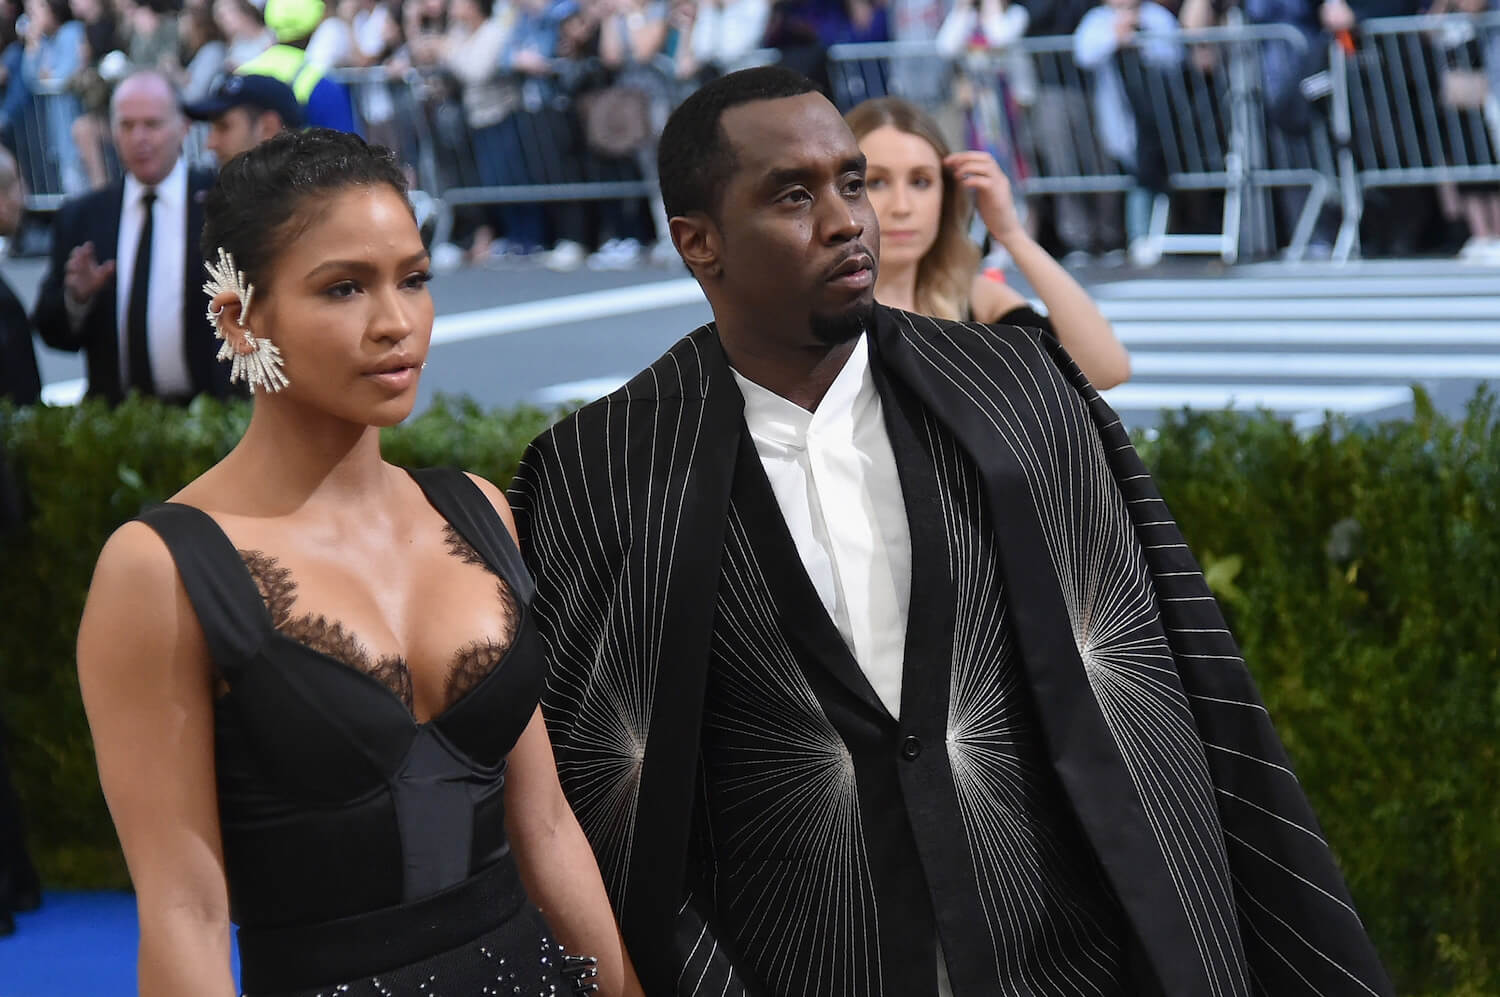 Casandra 'Cassie' Ventura standing next to Sean 'P. Diddy' Combs at the Met Gala in 2017. They are dressed in black.